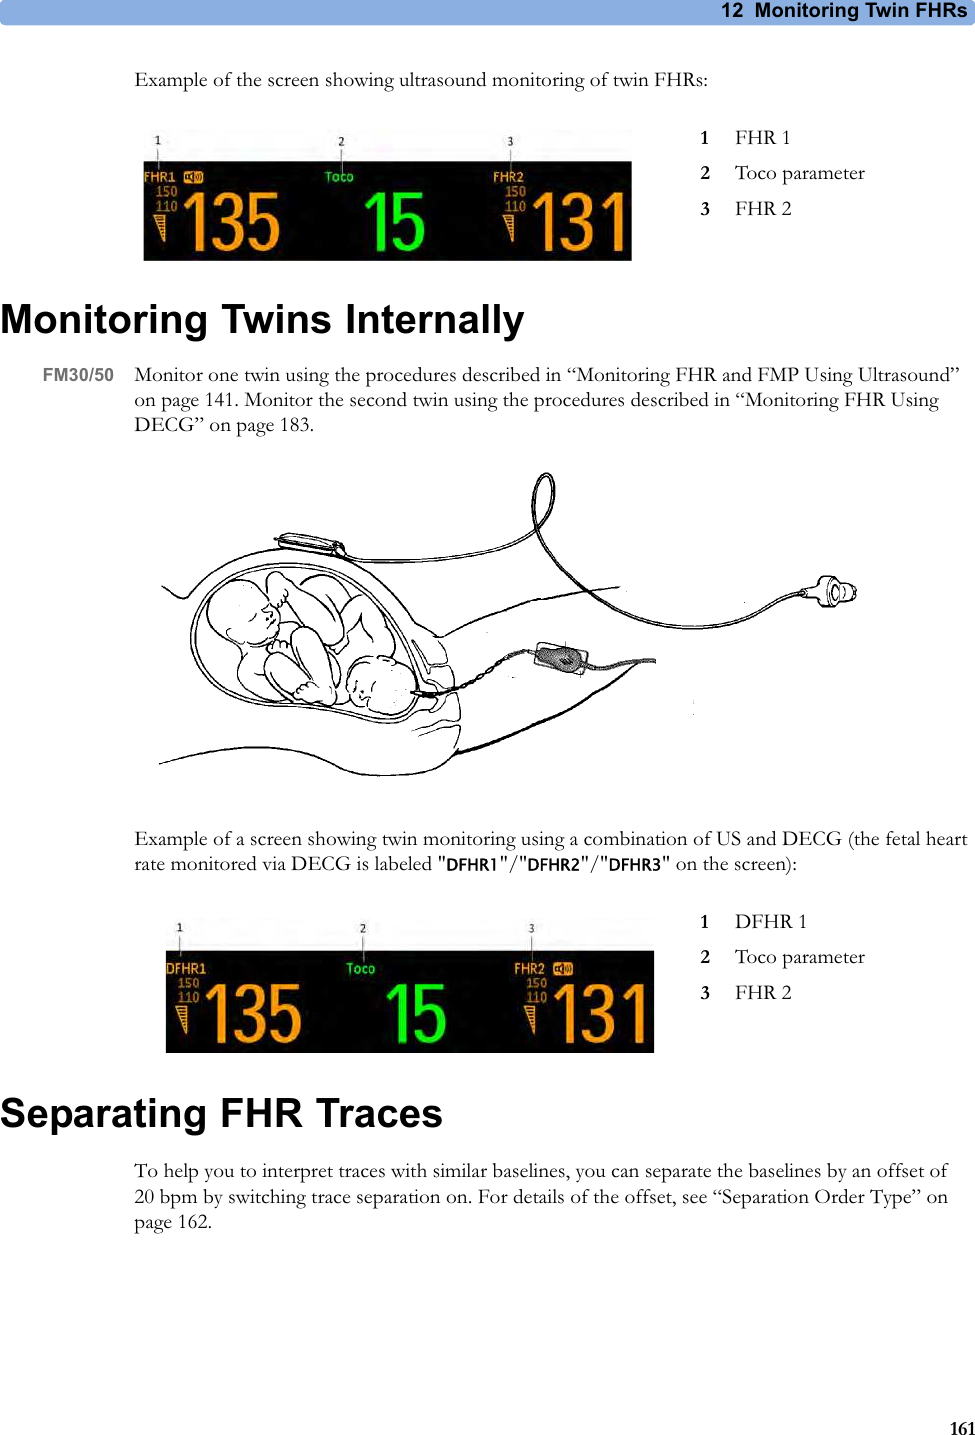 12  Monitoring Twin FHRs161Example of the screen showing ultrasound monitoring of twin FHRs:Monitoring Twins InternallyFM30/50 Monitor one twin using the procedures described in “Monitoring FHR and FMP Using Ultrasound” on page 141. Monitor the second twin using the procedures described in “Monitoring FHR Using DECG” on page 183.Example of a screen showing twin monitoring using a combination of US and DECG (the fetal heart rate monitored via DECG is labeled &quot;DFHR1&quot;/&quot;DFHR2&quot;/&quot;DFHR3&quot; on the screen):Separating FHR TracesTo help you to interpret traces with similar baselines, you can separate the baselines by an offset of 20 bpm by switching trace separation on. For details of the offset, see “Separation Order Type” on page 162.1FHR 12Toco parameter3FHR 21DFHR 12Toco parameter3FHR 2